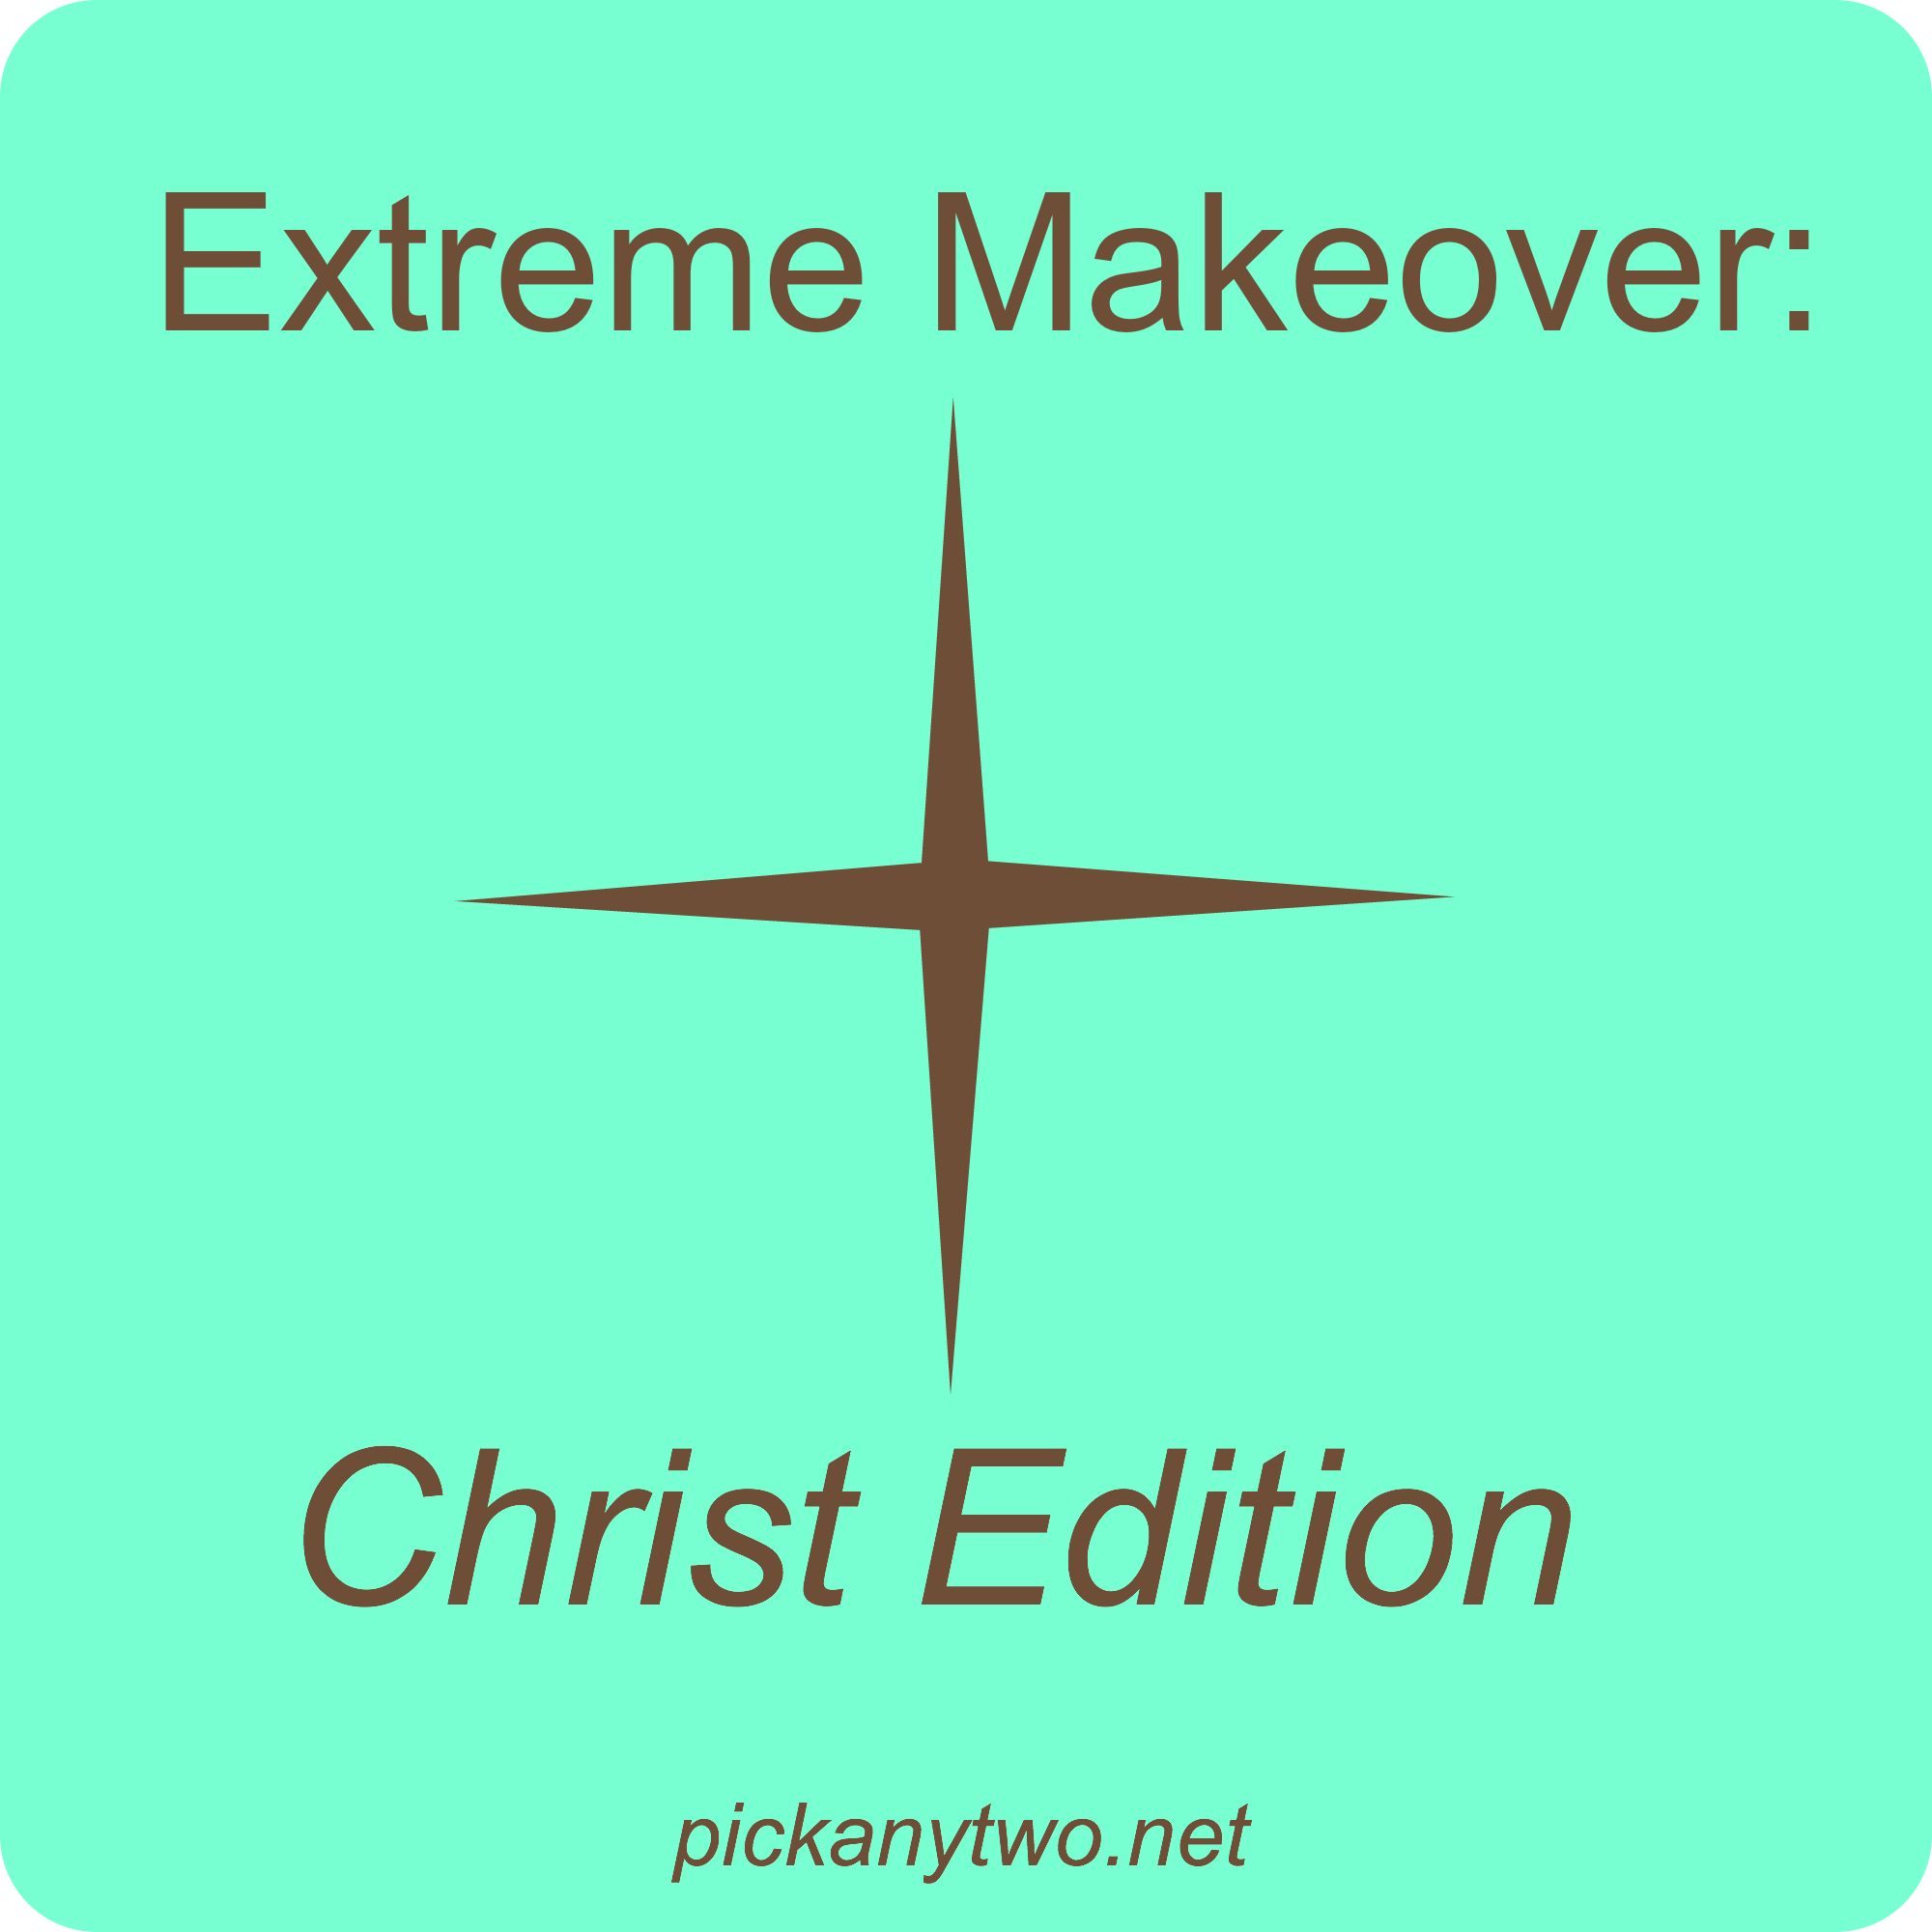 Extreme Makeover Christ Edition